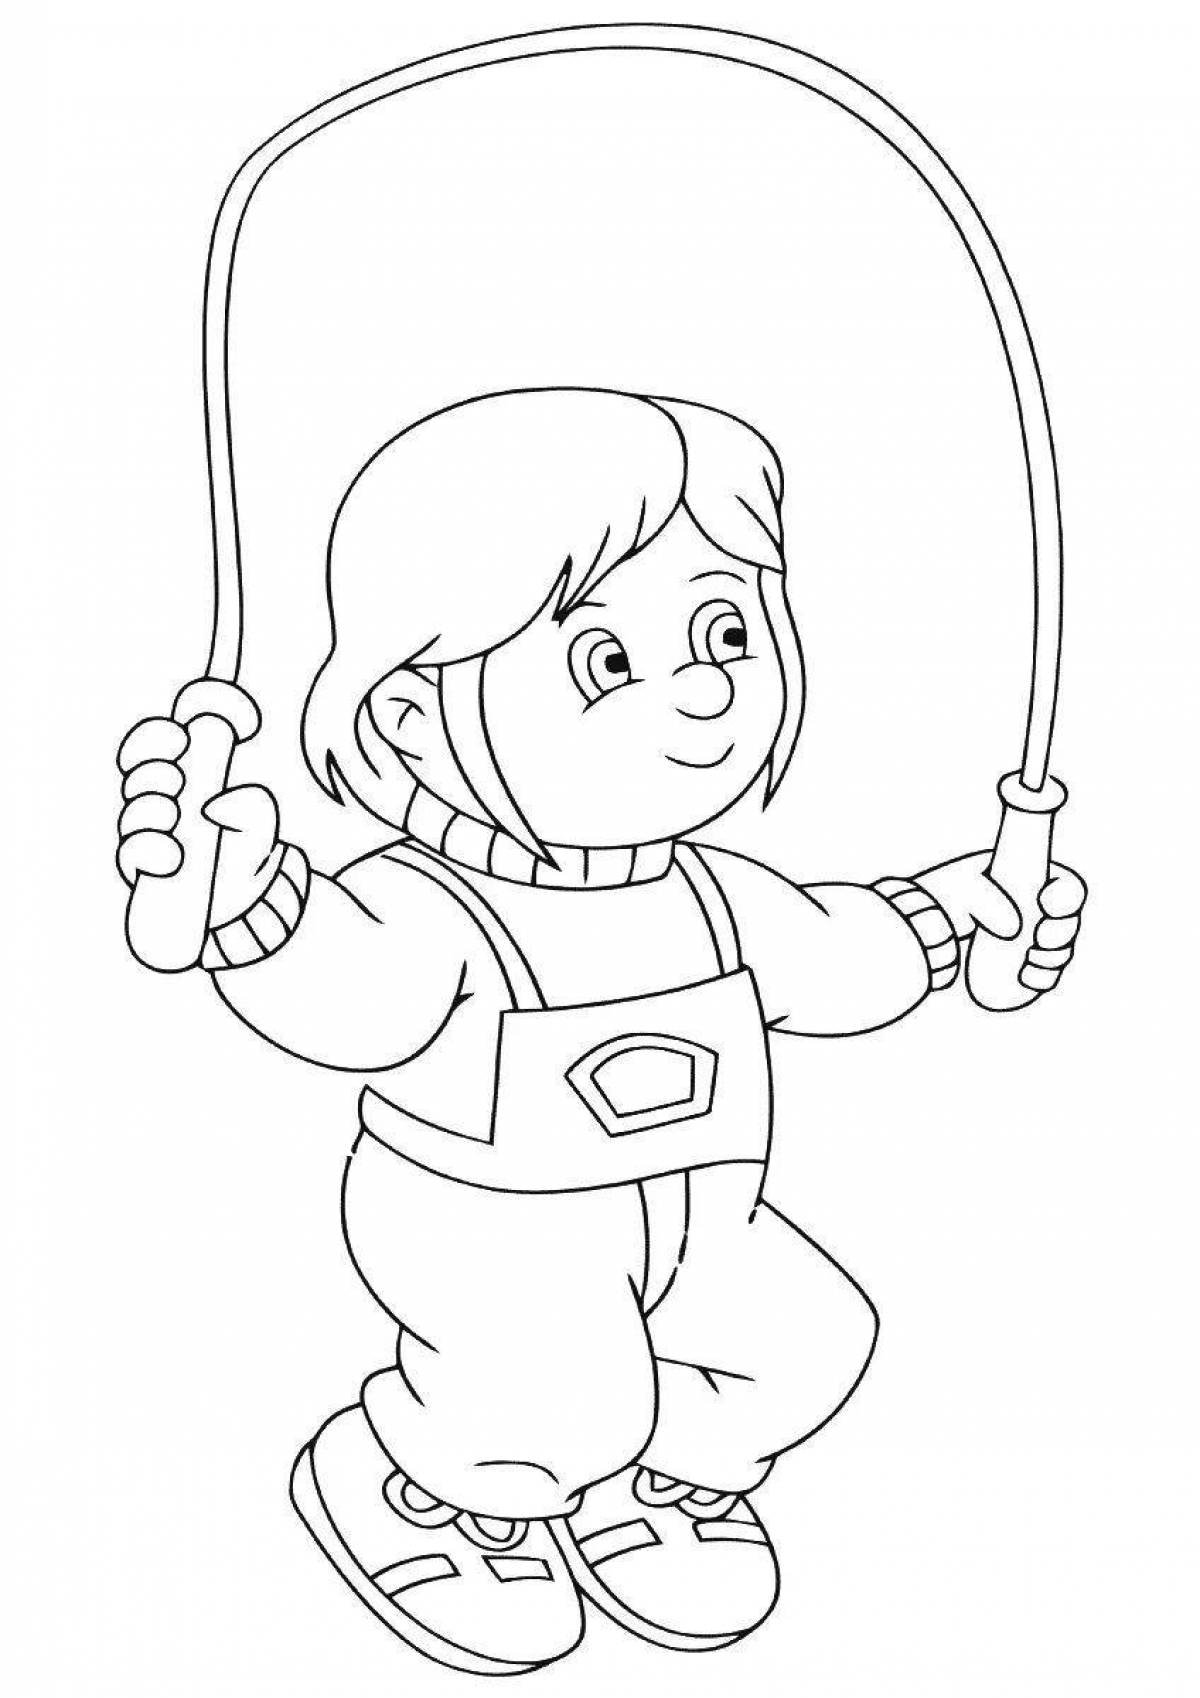 A fun jump rope coloring page